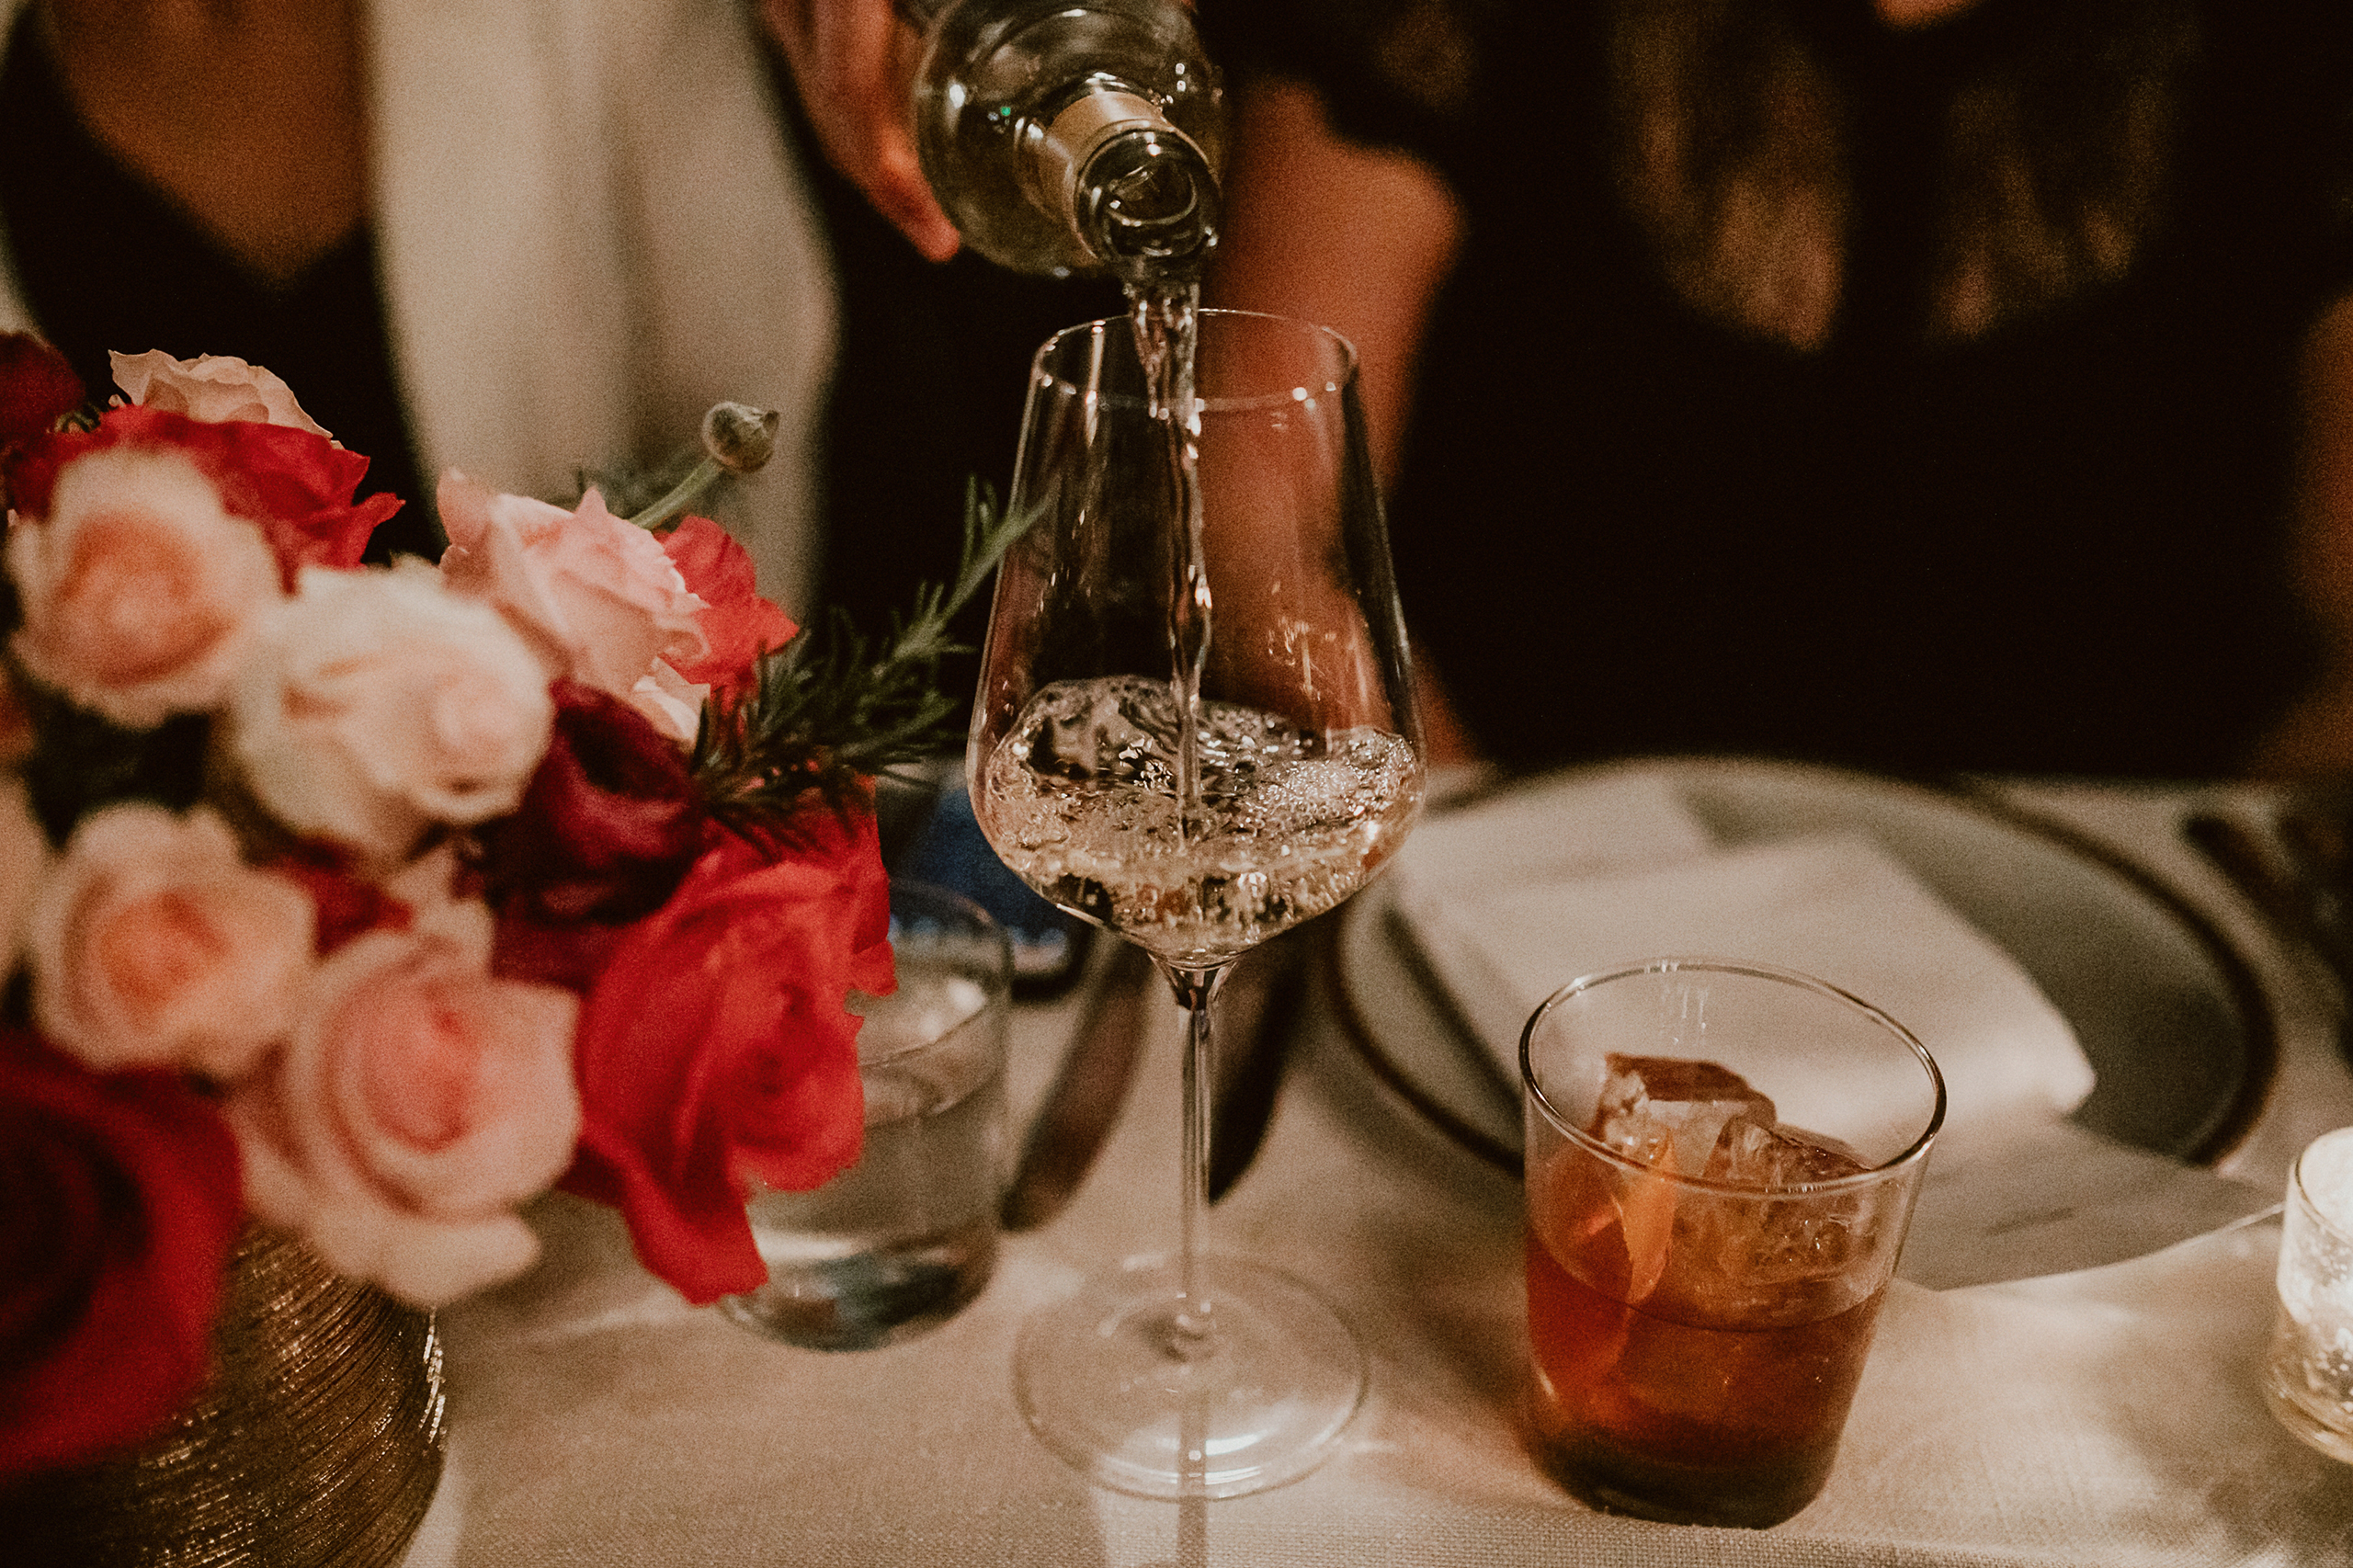 wine being poured with flowers on table